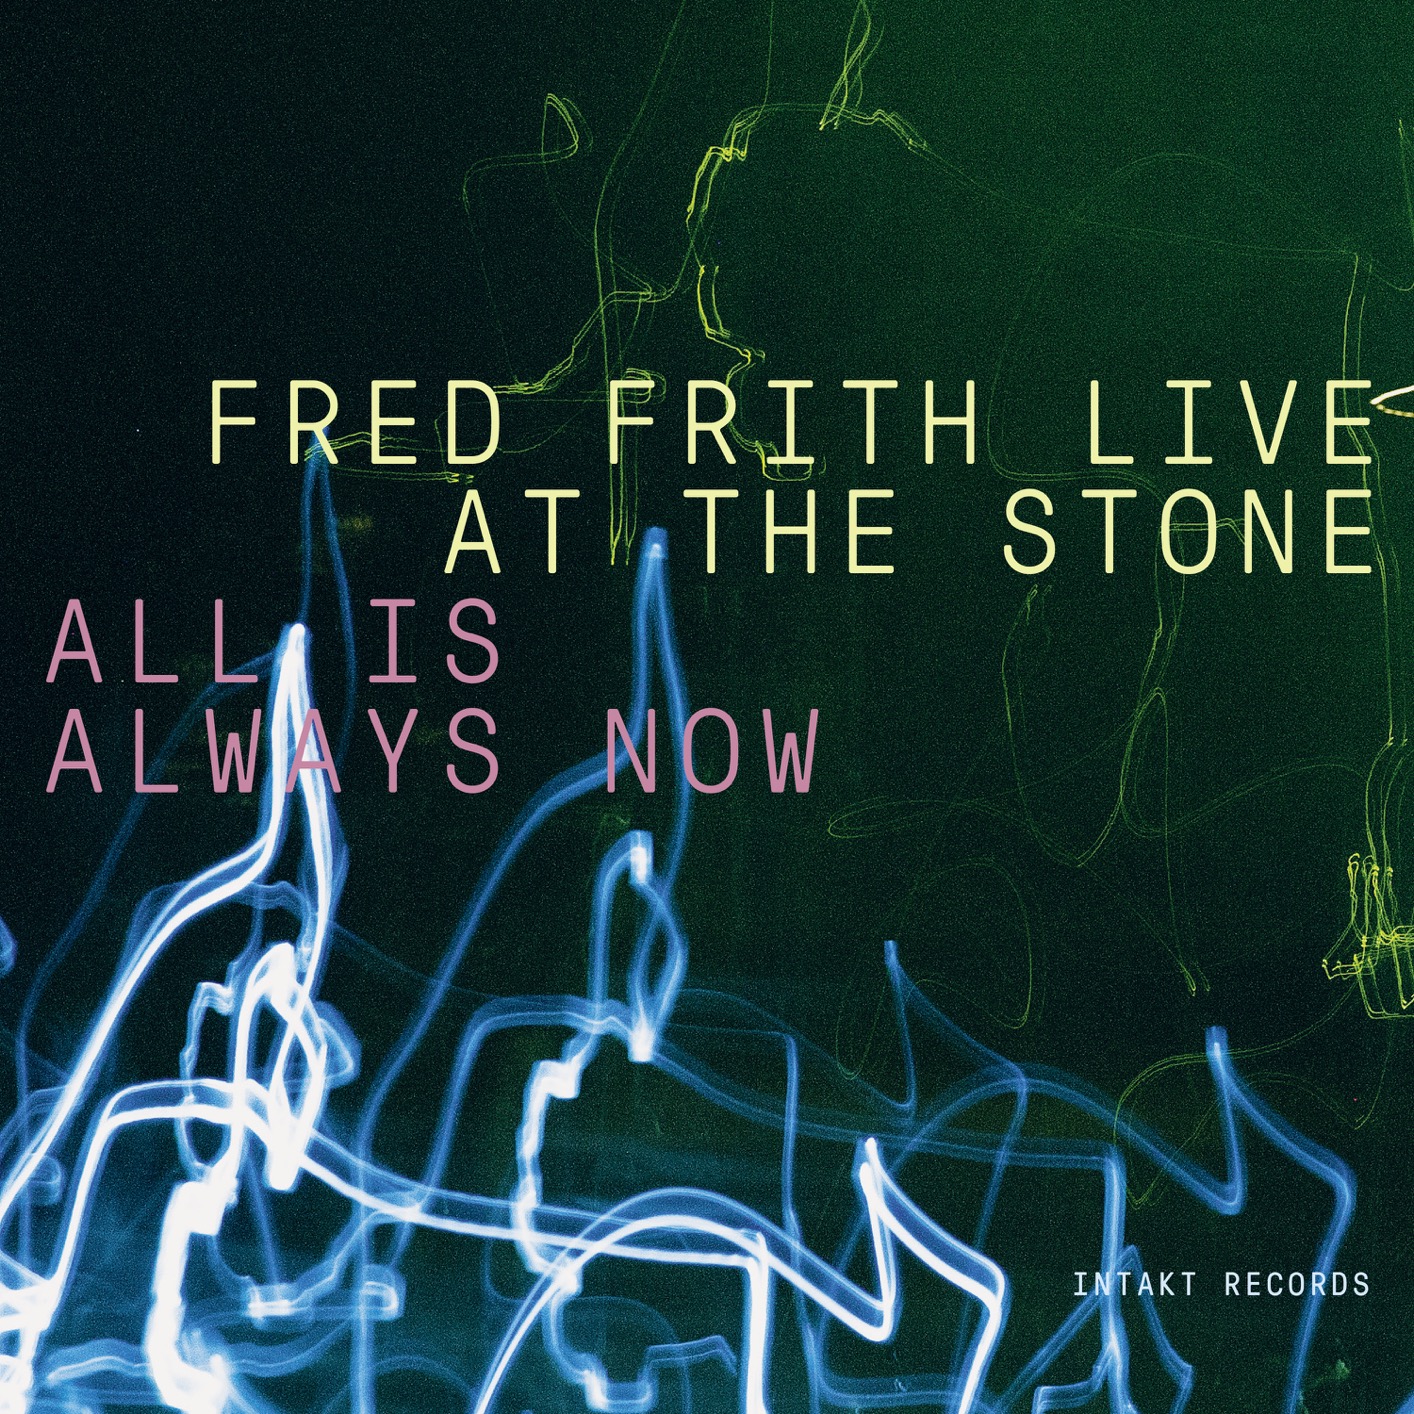 Fred Frith - All Is Always Now (Live) (2019) [FLAC 24bit/44,1kHz]